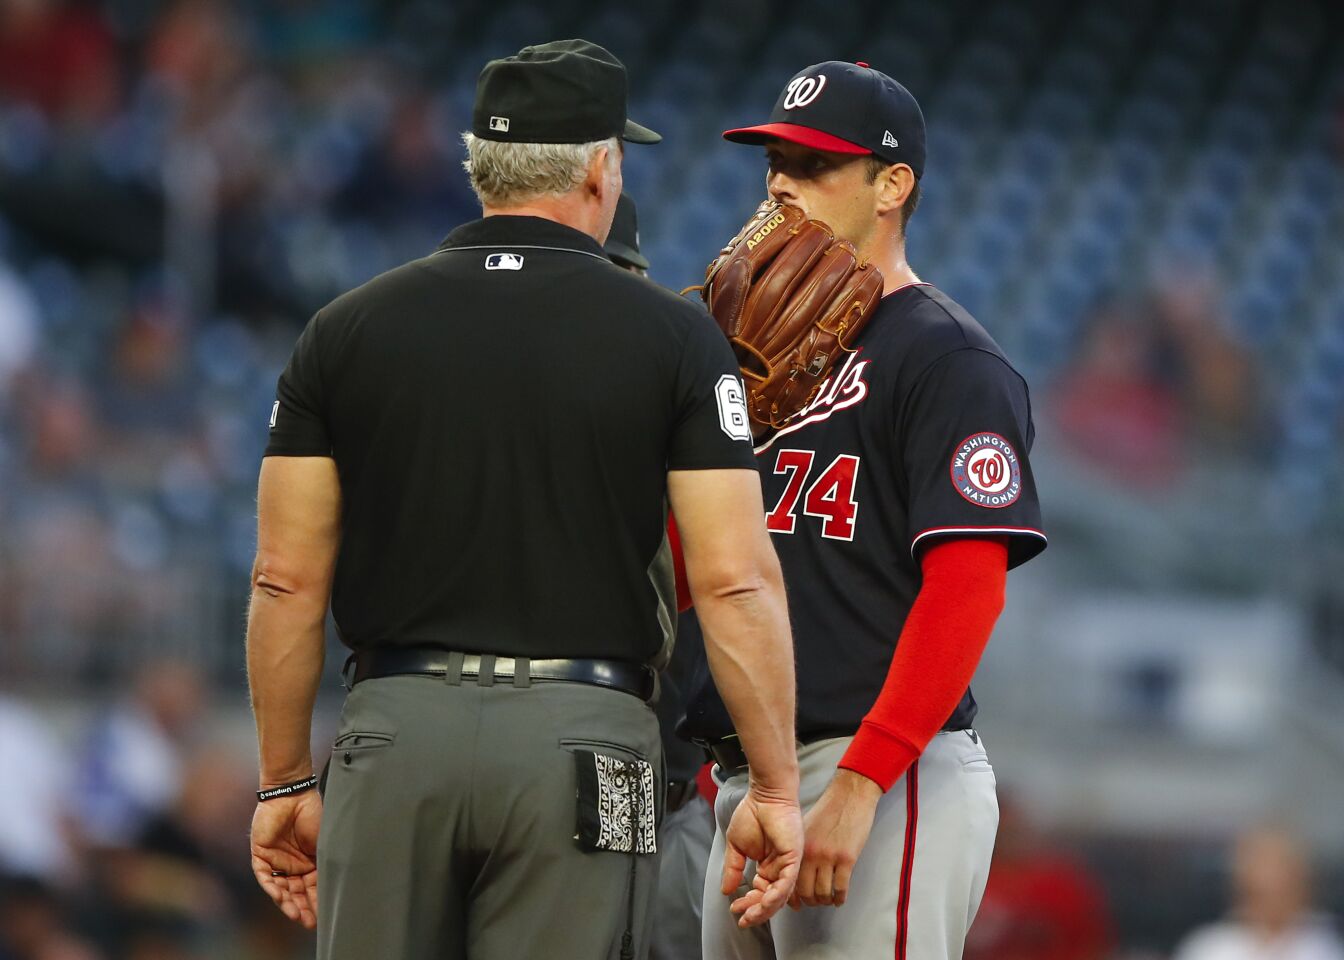 26 | Washington Nationals (59-84; LW: 26)Sean Nolin threw twice at Freddie Freeman, hit him the second time and got a five-game suspension. And the only question is how was the ban not longer? Freeman is a national treasure.